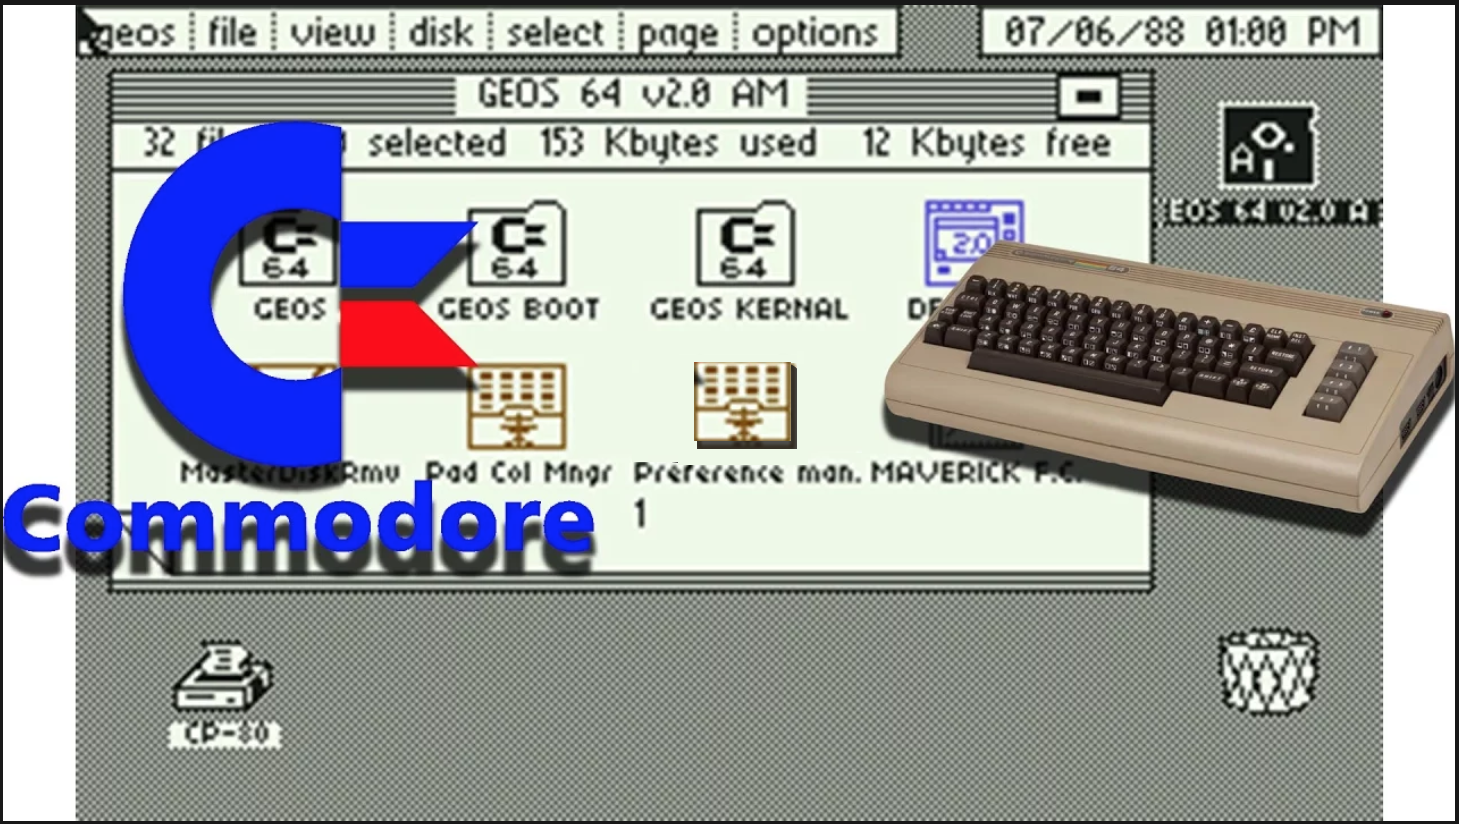 2GB Commodore 64 GEOS for Windows-PC, games appswhdload games